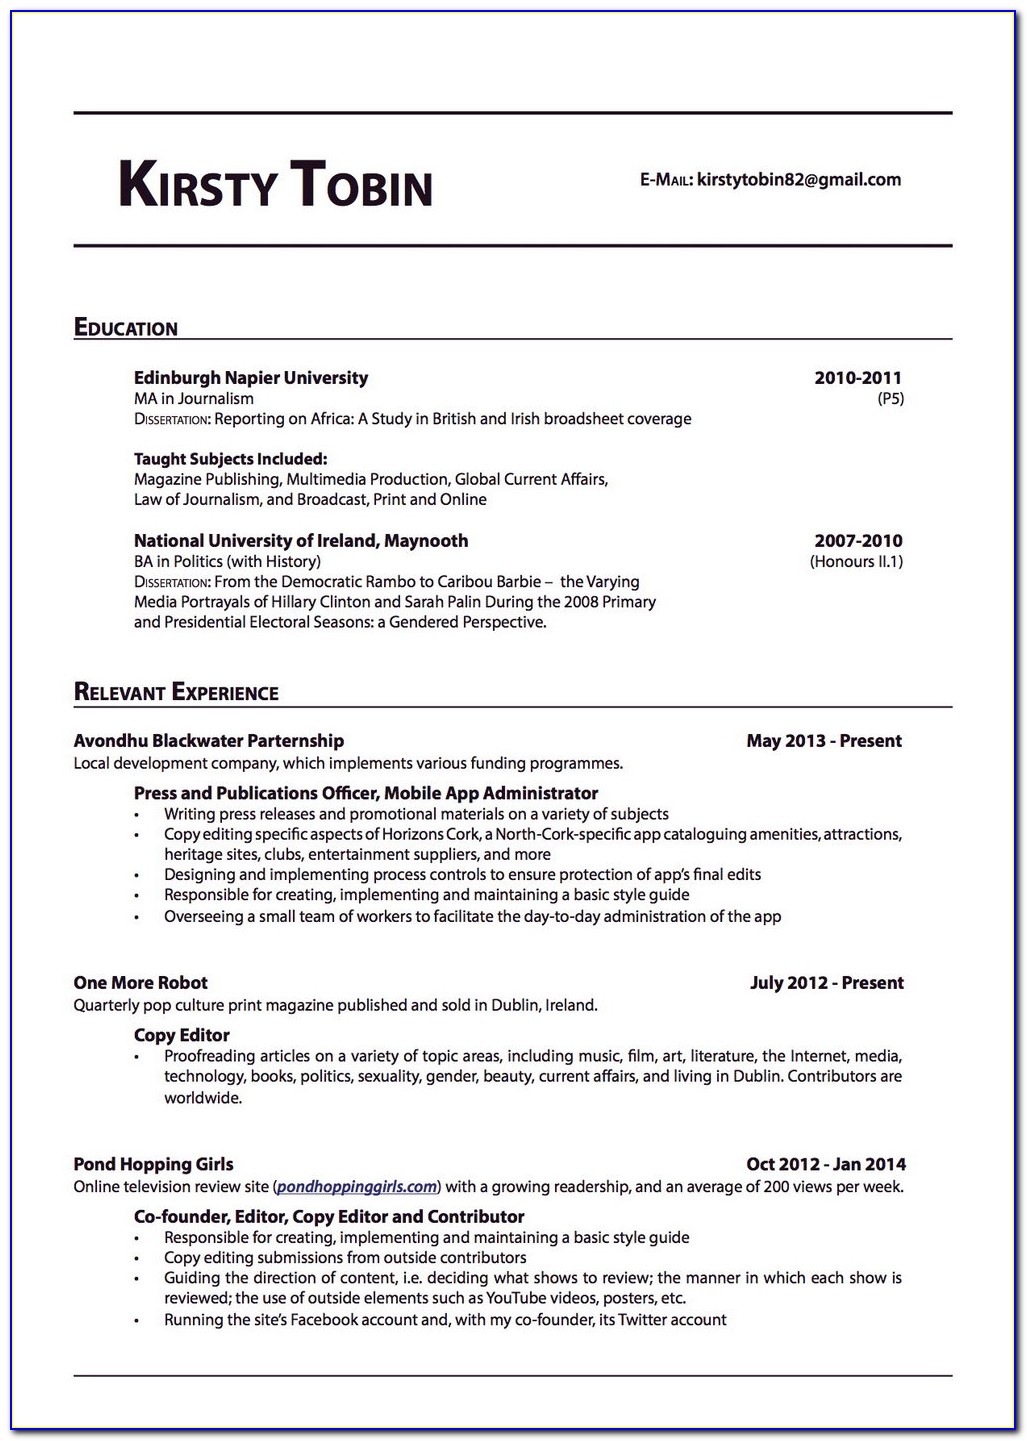 Resume Professional Writers Complaints